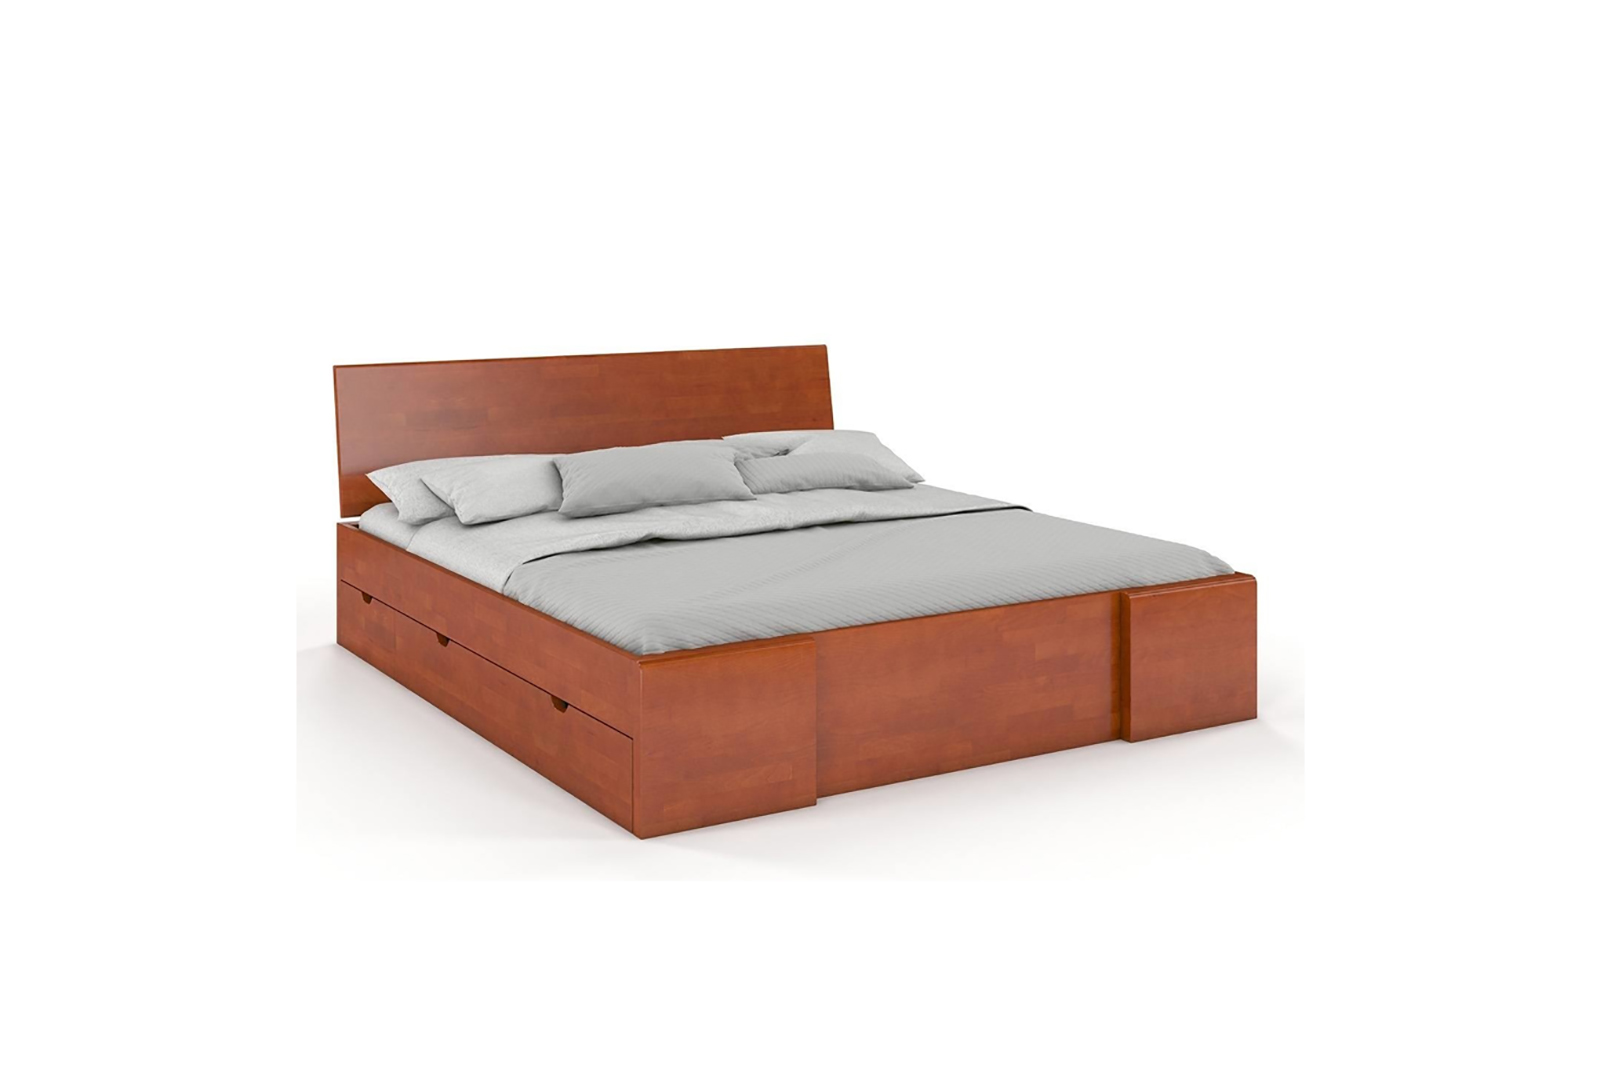 VISBY HESSLER HIGH DRAWERS BEECH BED WITH DRAWERS 2